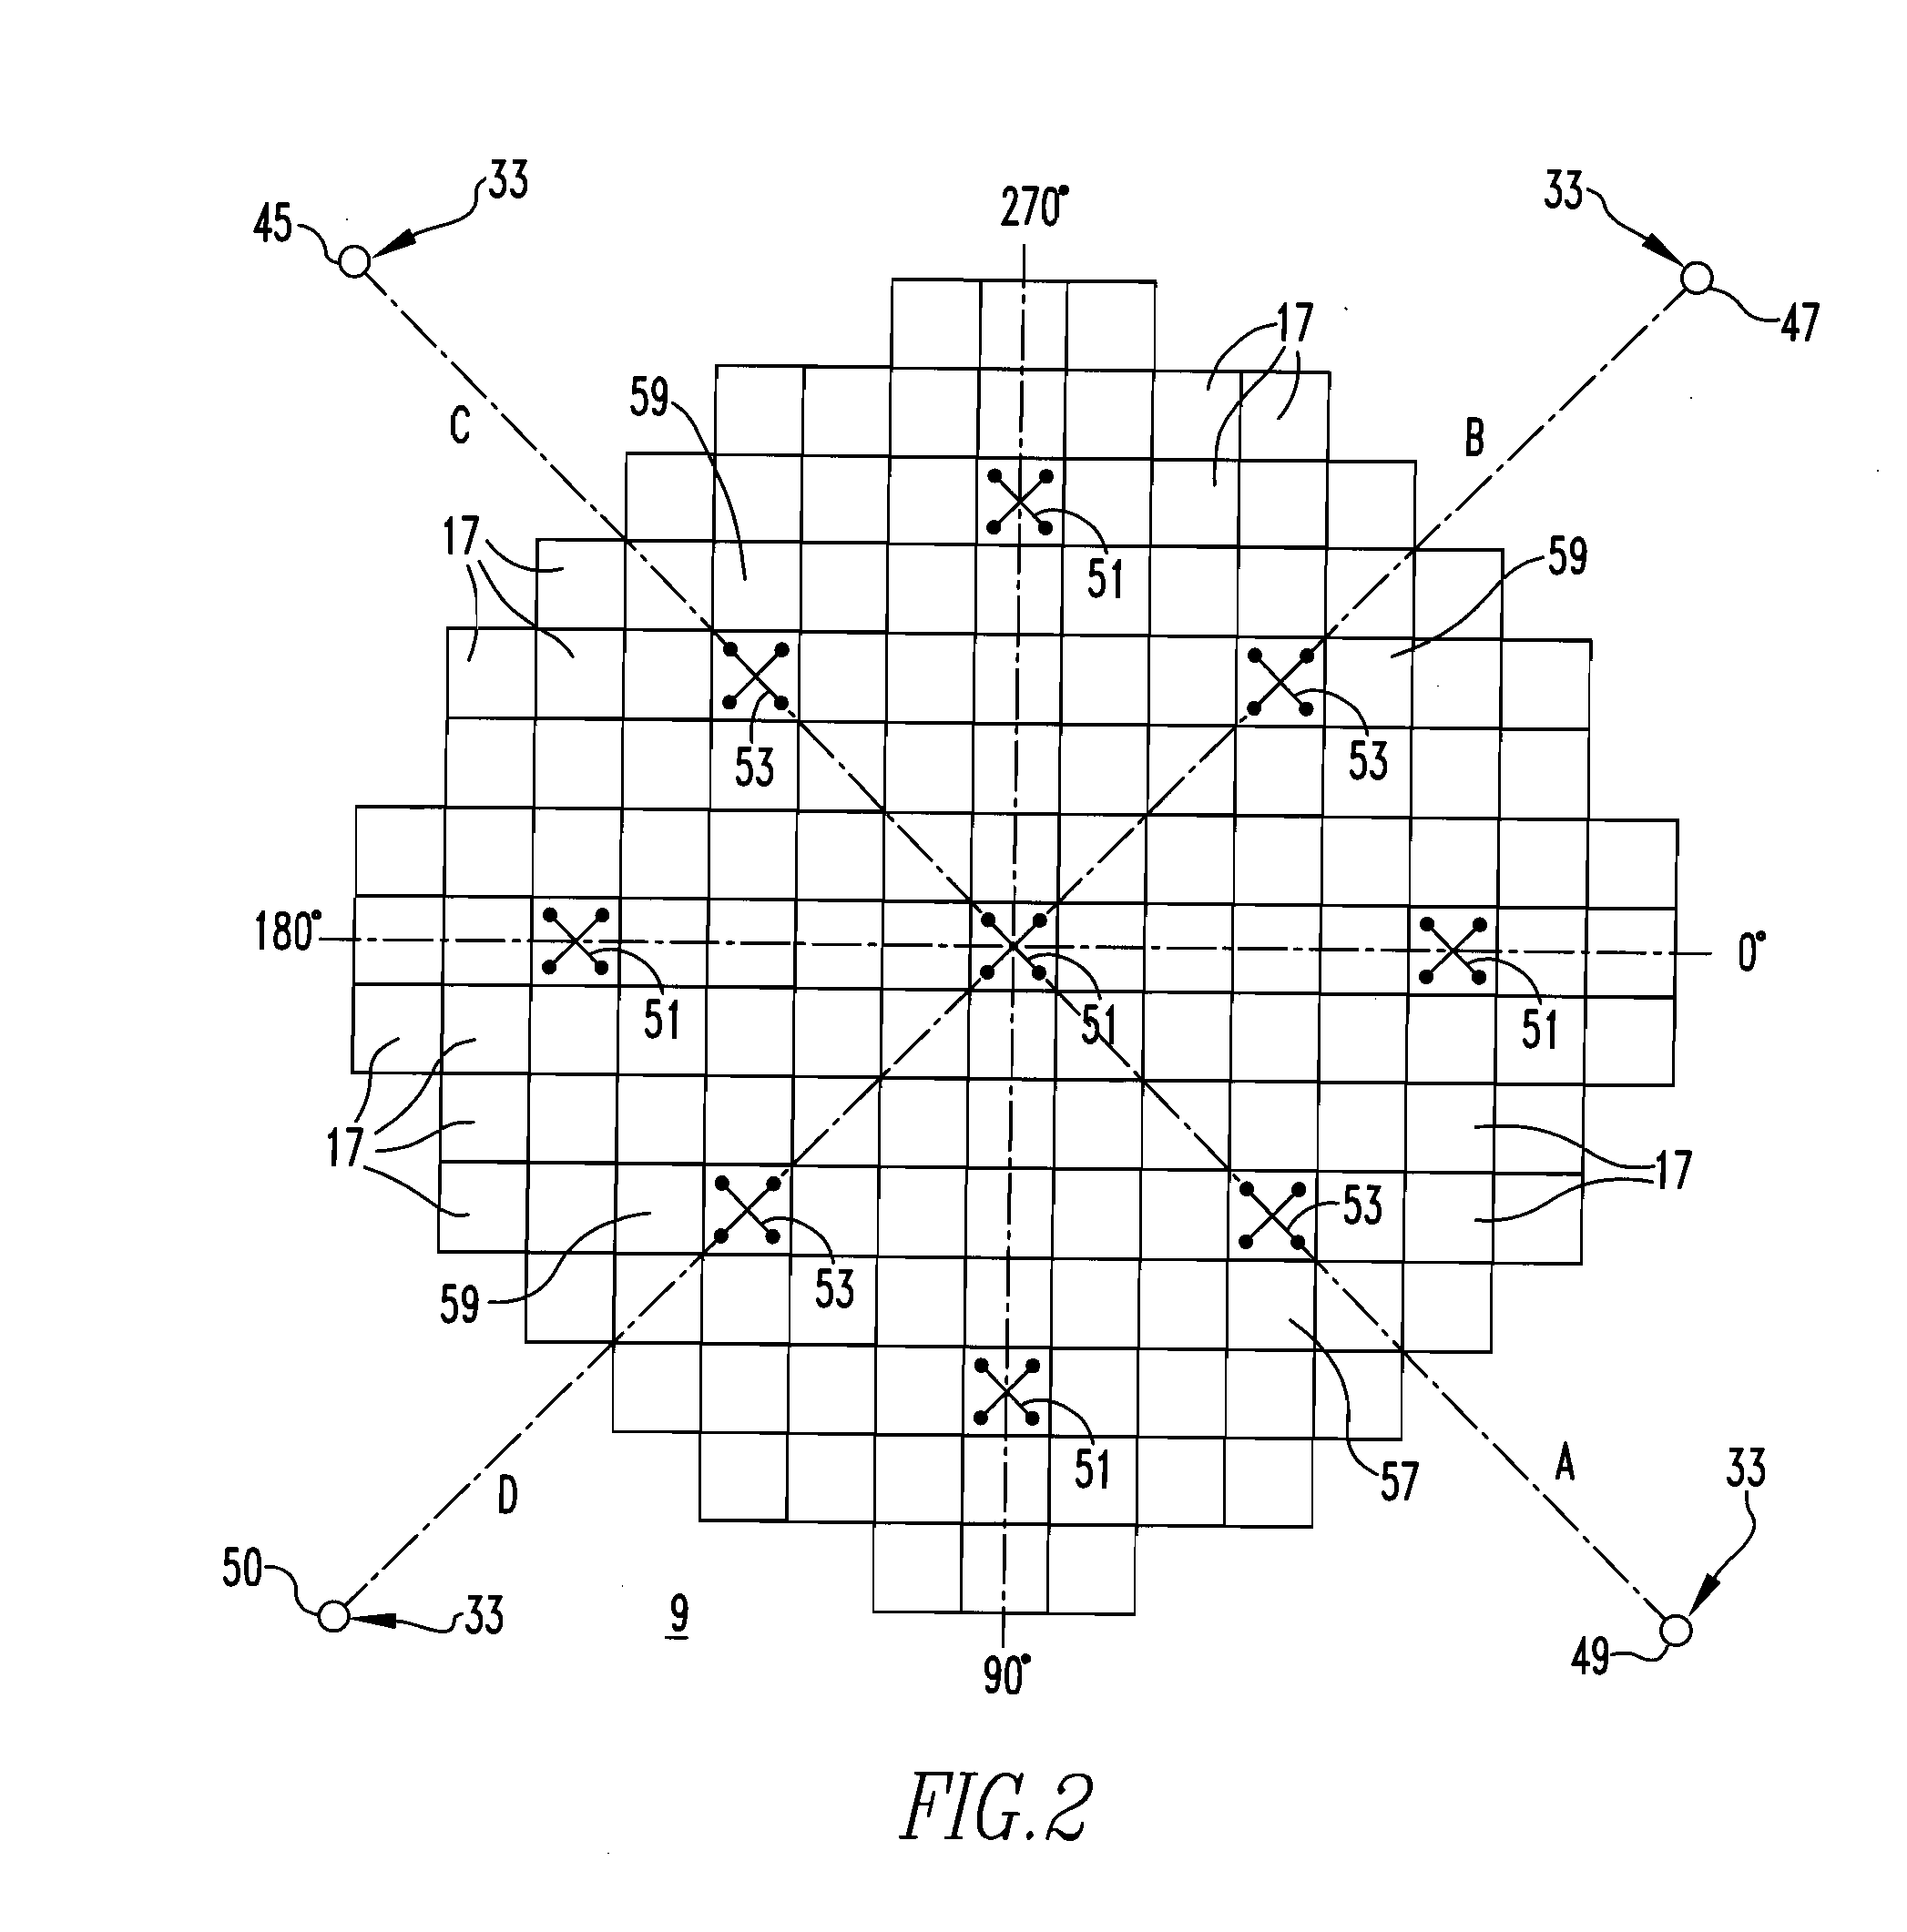 Method of calibrating excore detectors in a nuclear reactor